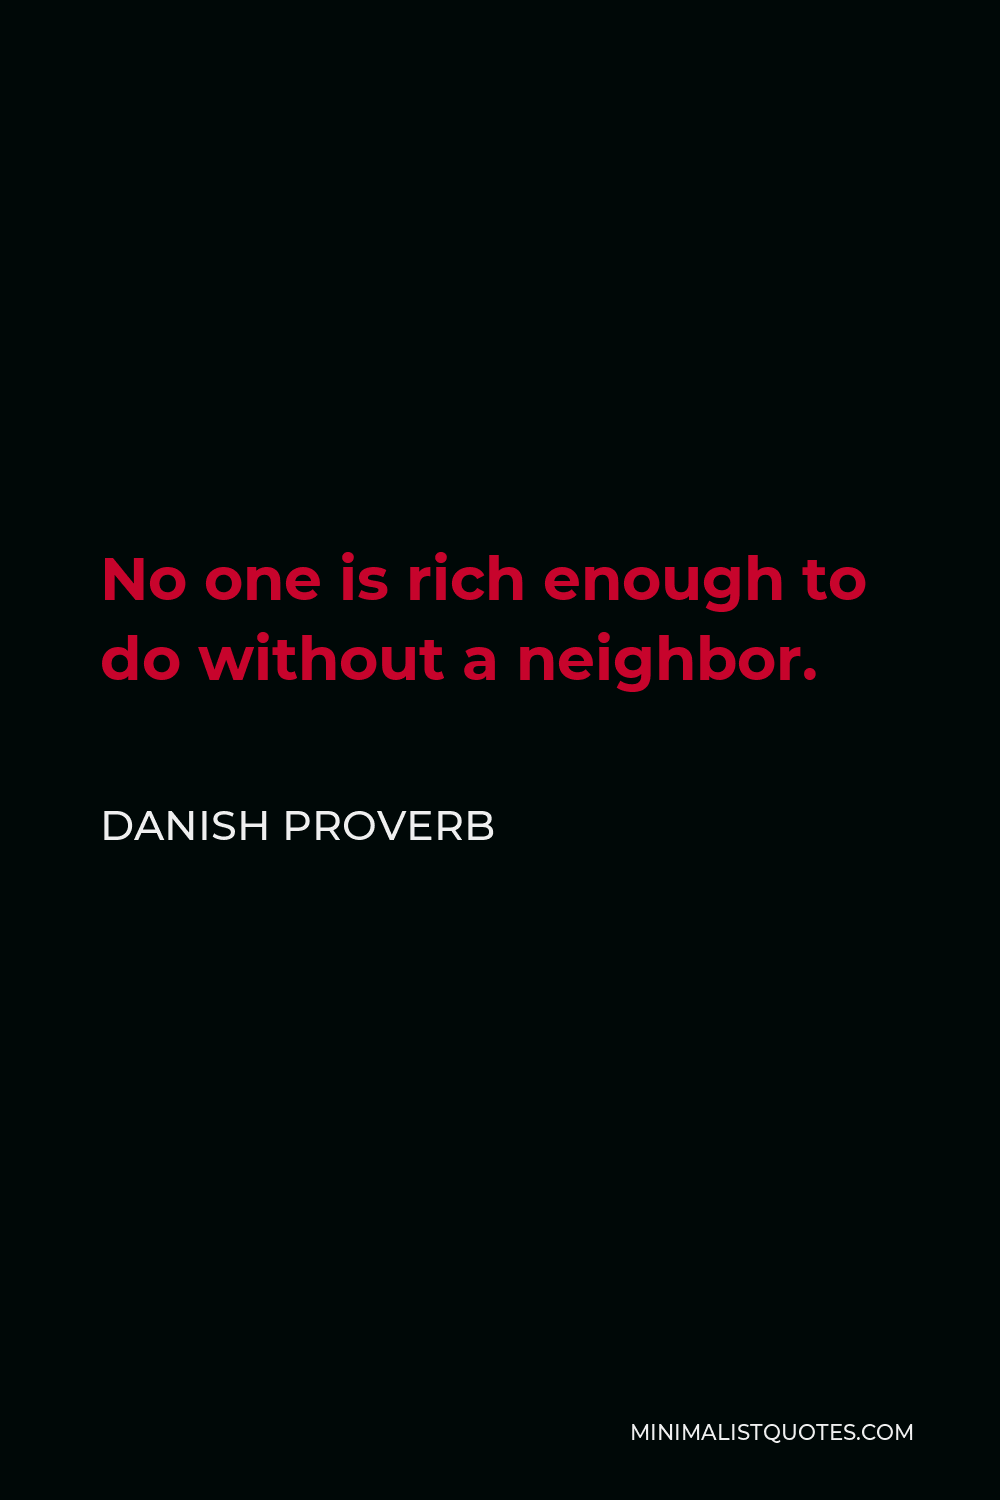 Danish Proverb Quote - No one is rich enough to do without a neighbor.